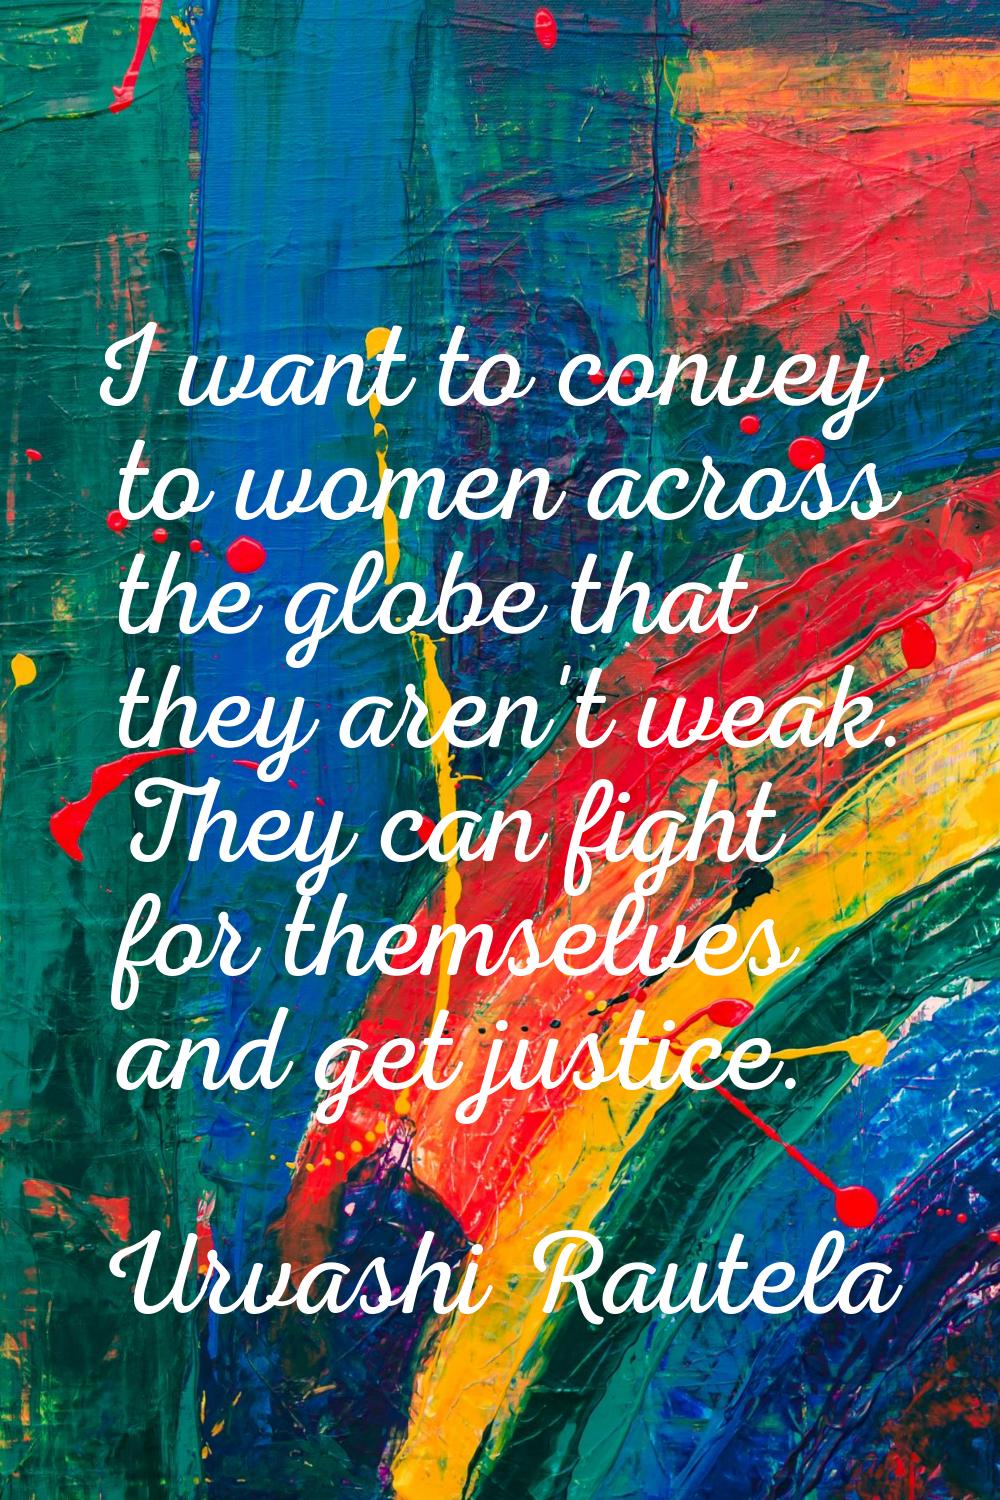 I want to convey to women across the globe that they aren't weak. They can fight for themselves and